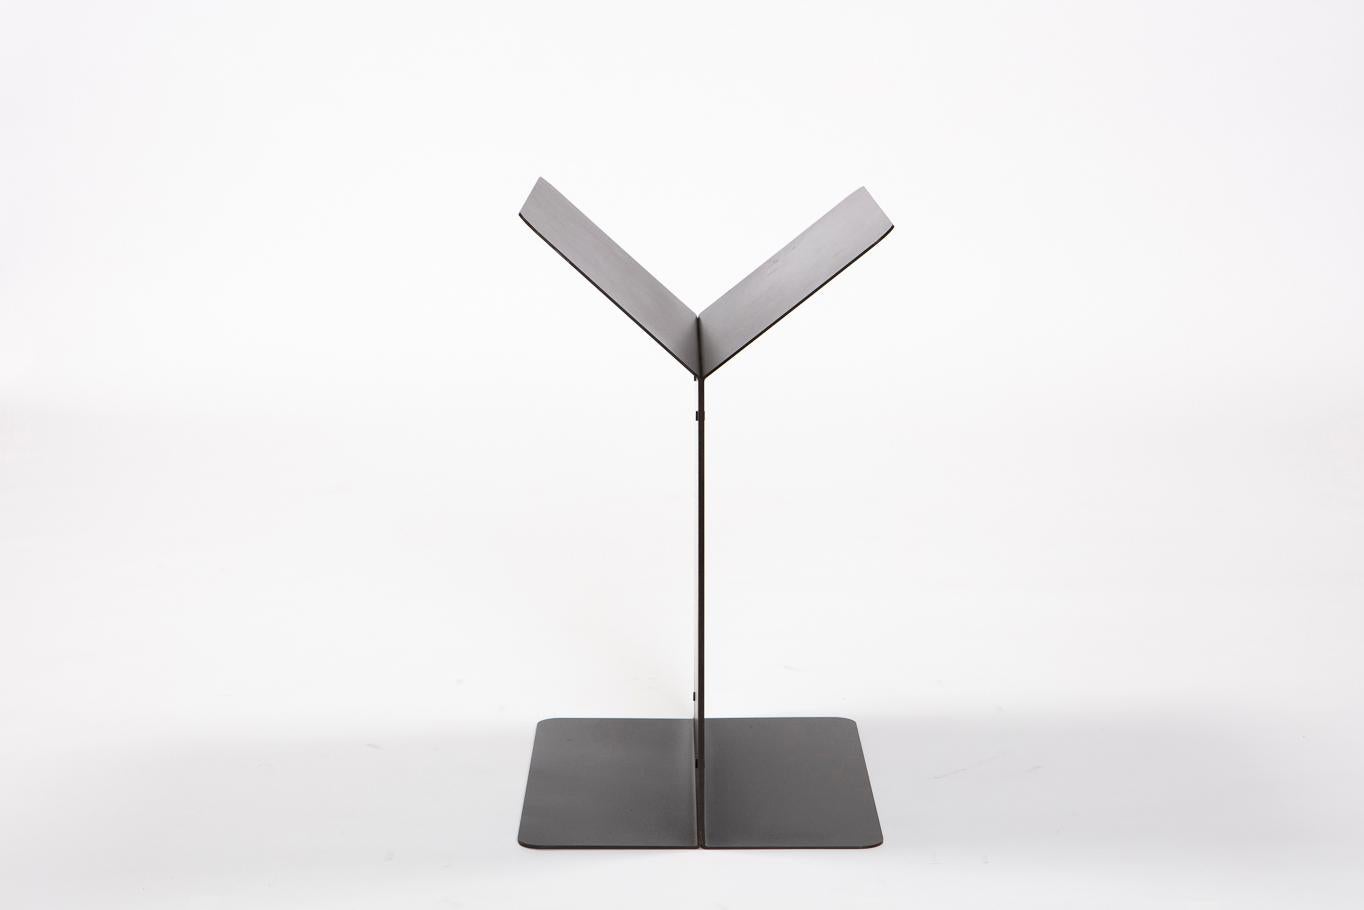 Collection I: Y Rack

The Y Rack is an elegant, minimal, and modern object that is both sculptural and functional - a crisp silhouette creating the illusion that the form and its contents are suspended weightlessly.

Dimensions:
13 15/16